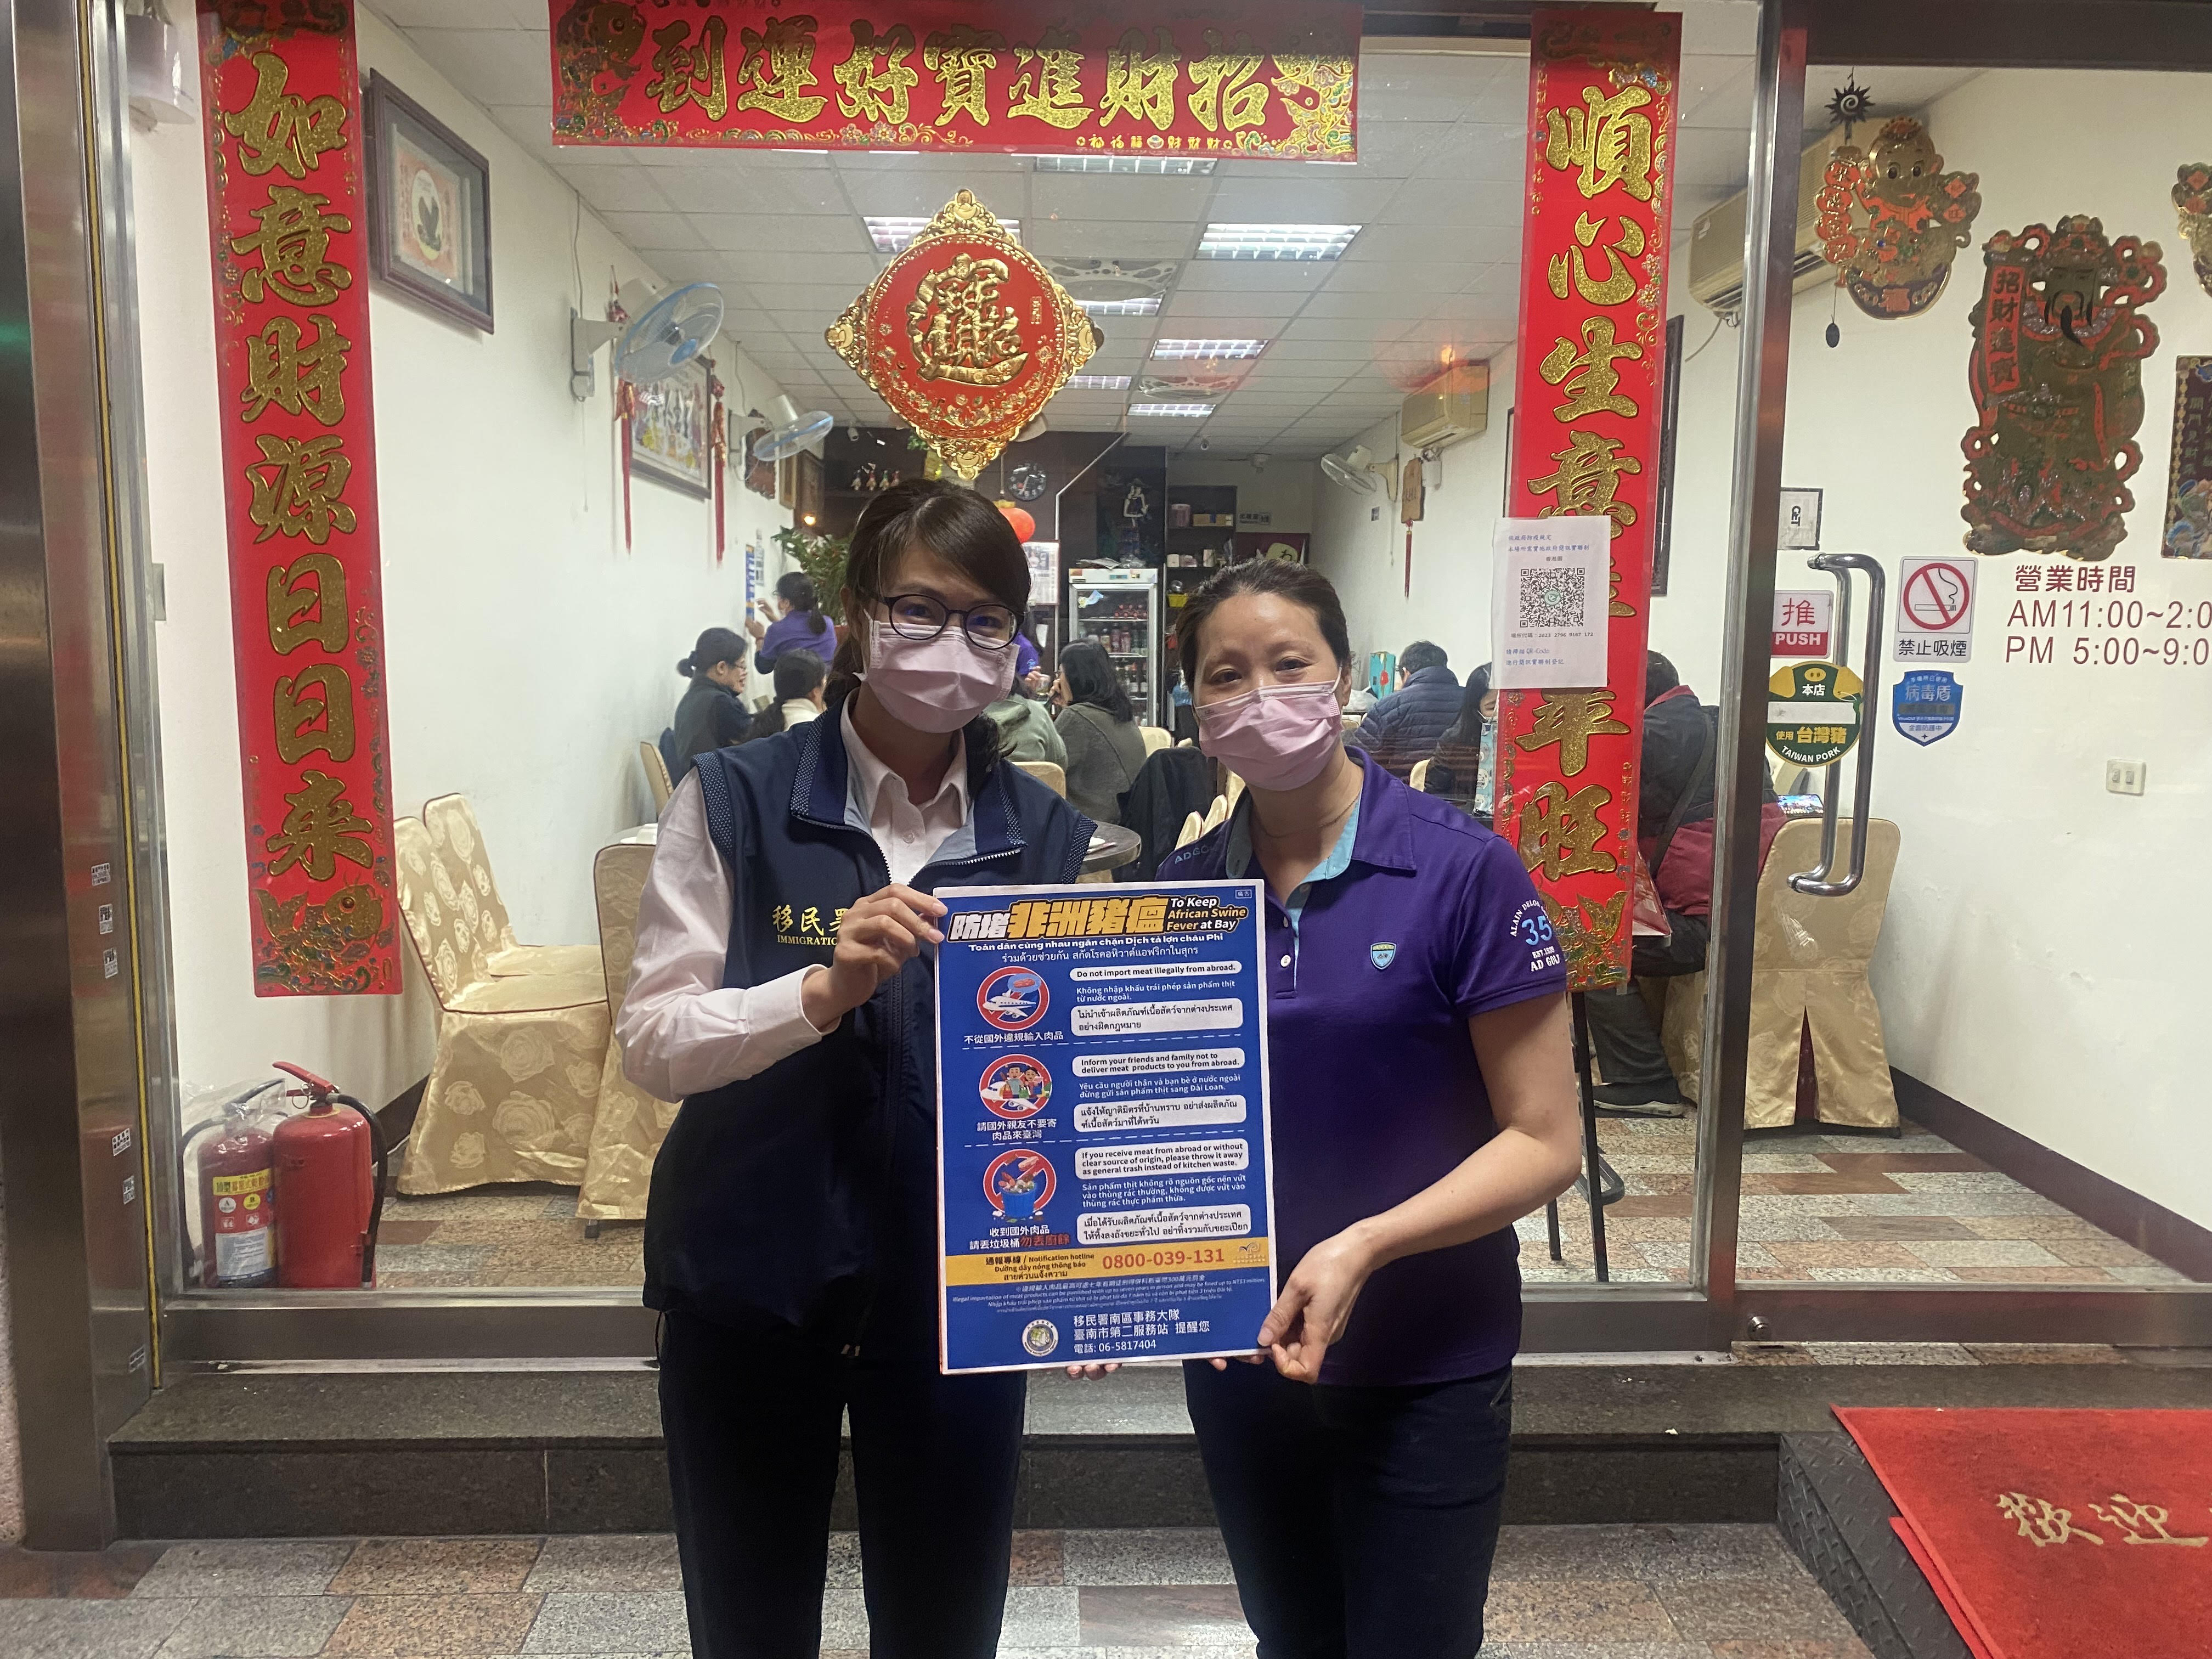 Ms. Yang running a restaurant in Tainan shares relevant information of “Prevention of African Swine Fever” to customers. (Photo / Provided by Tainan City Second Service Center)